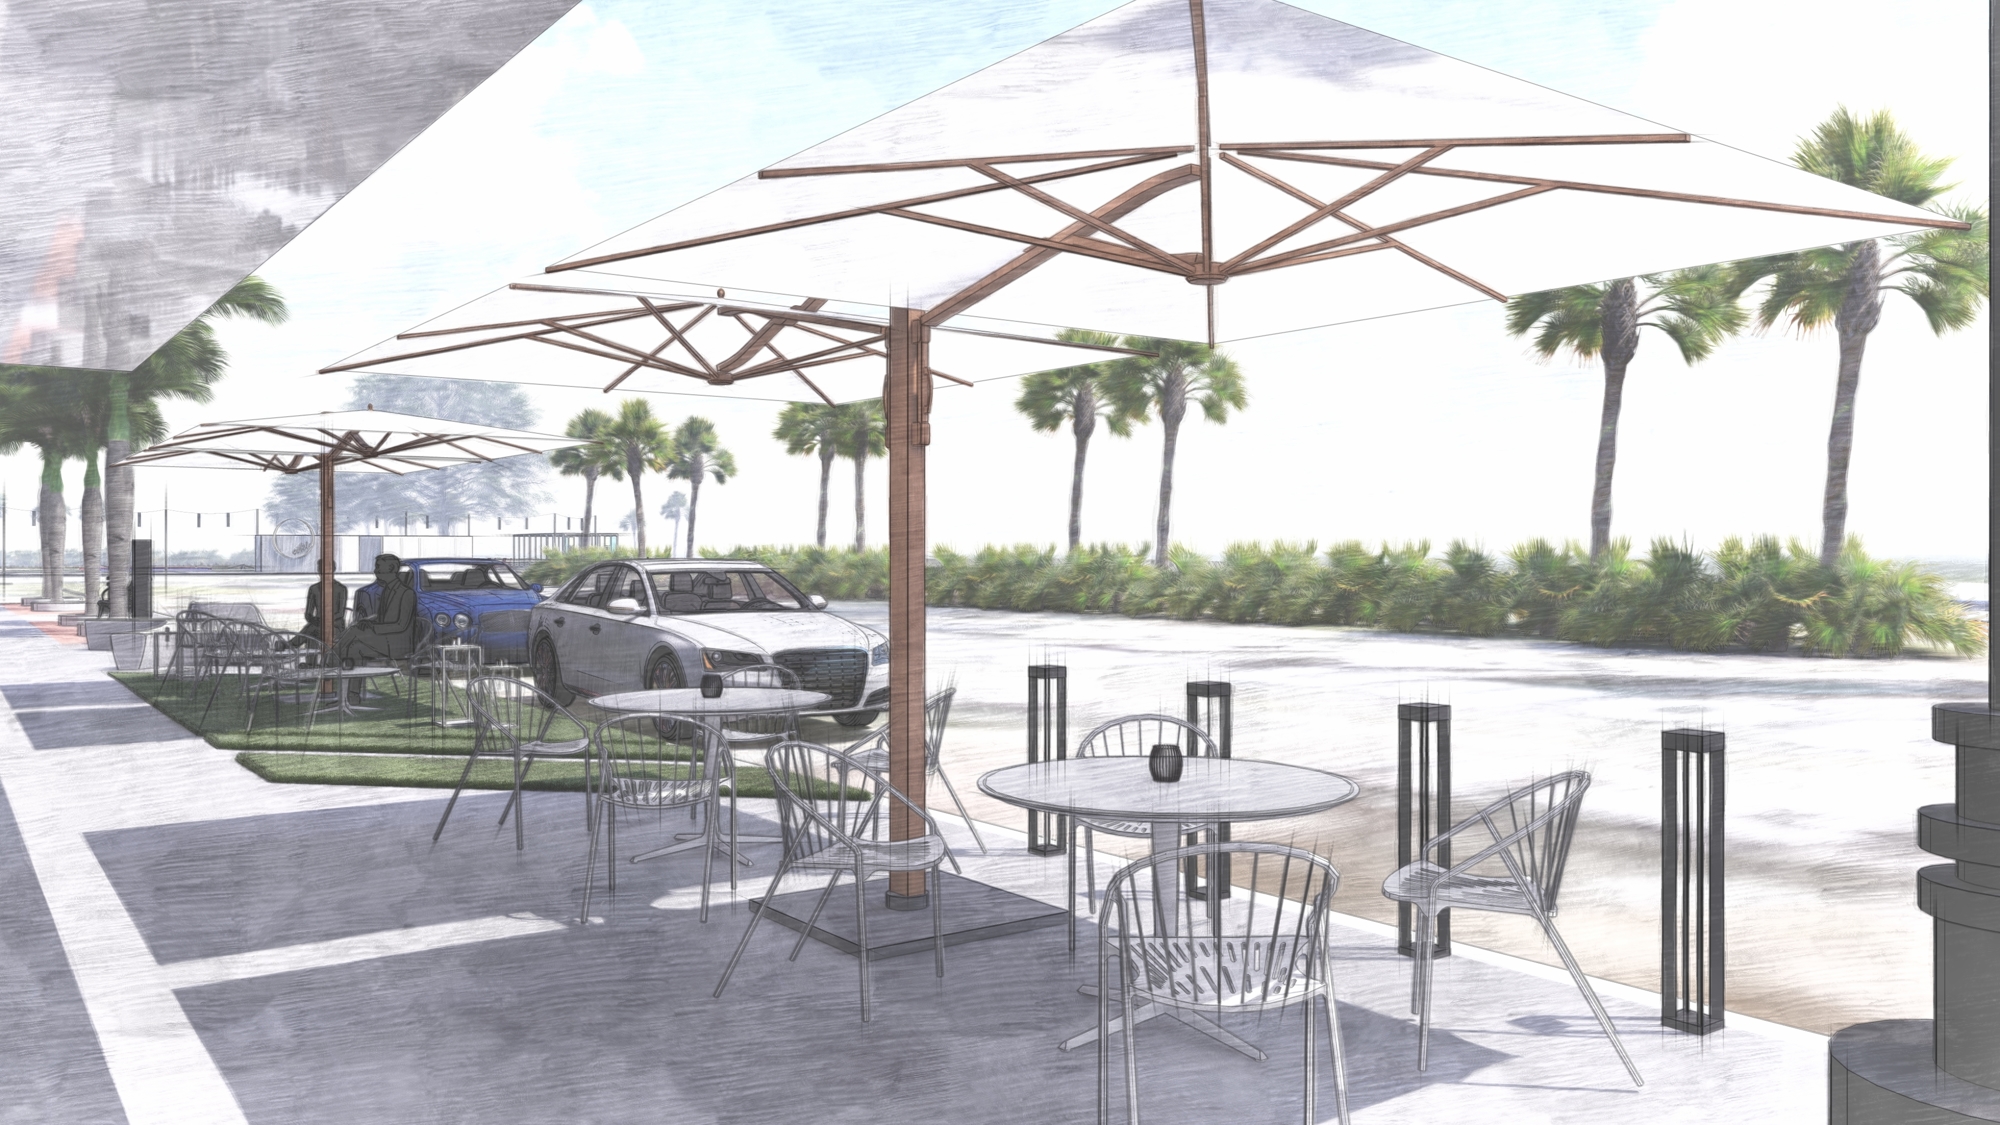 Dan Lear suggested adding public seating could give visitors to St. Armands more options if they wanted to take out food from a restaurant but continue to hang out in the area.